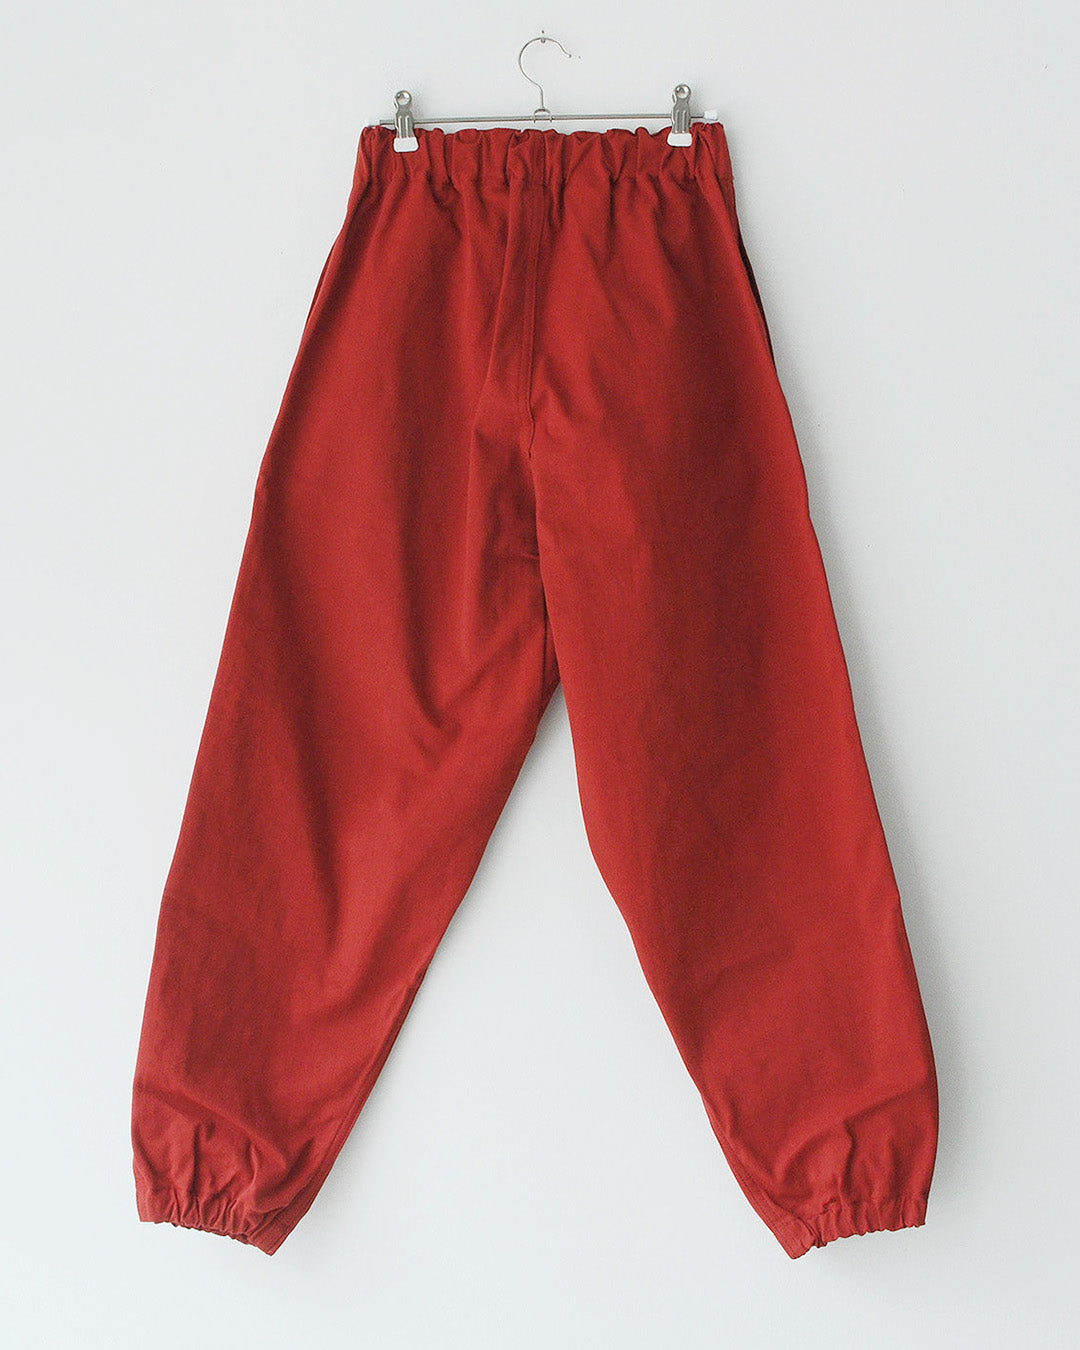 TUKI gum pants / red / solid twill / size0,1